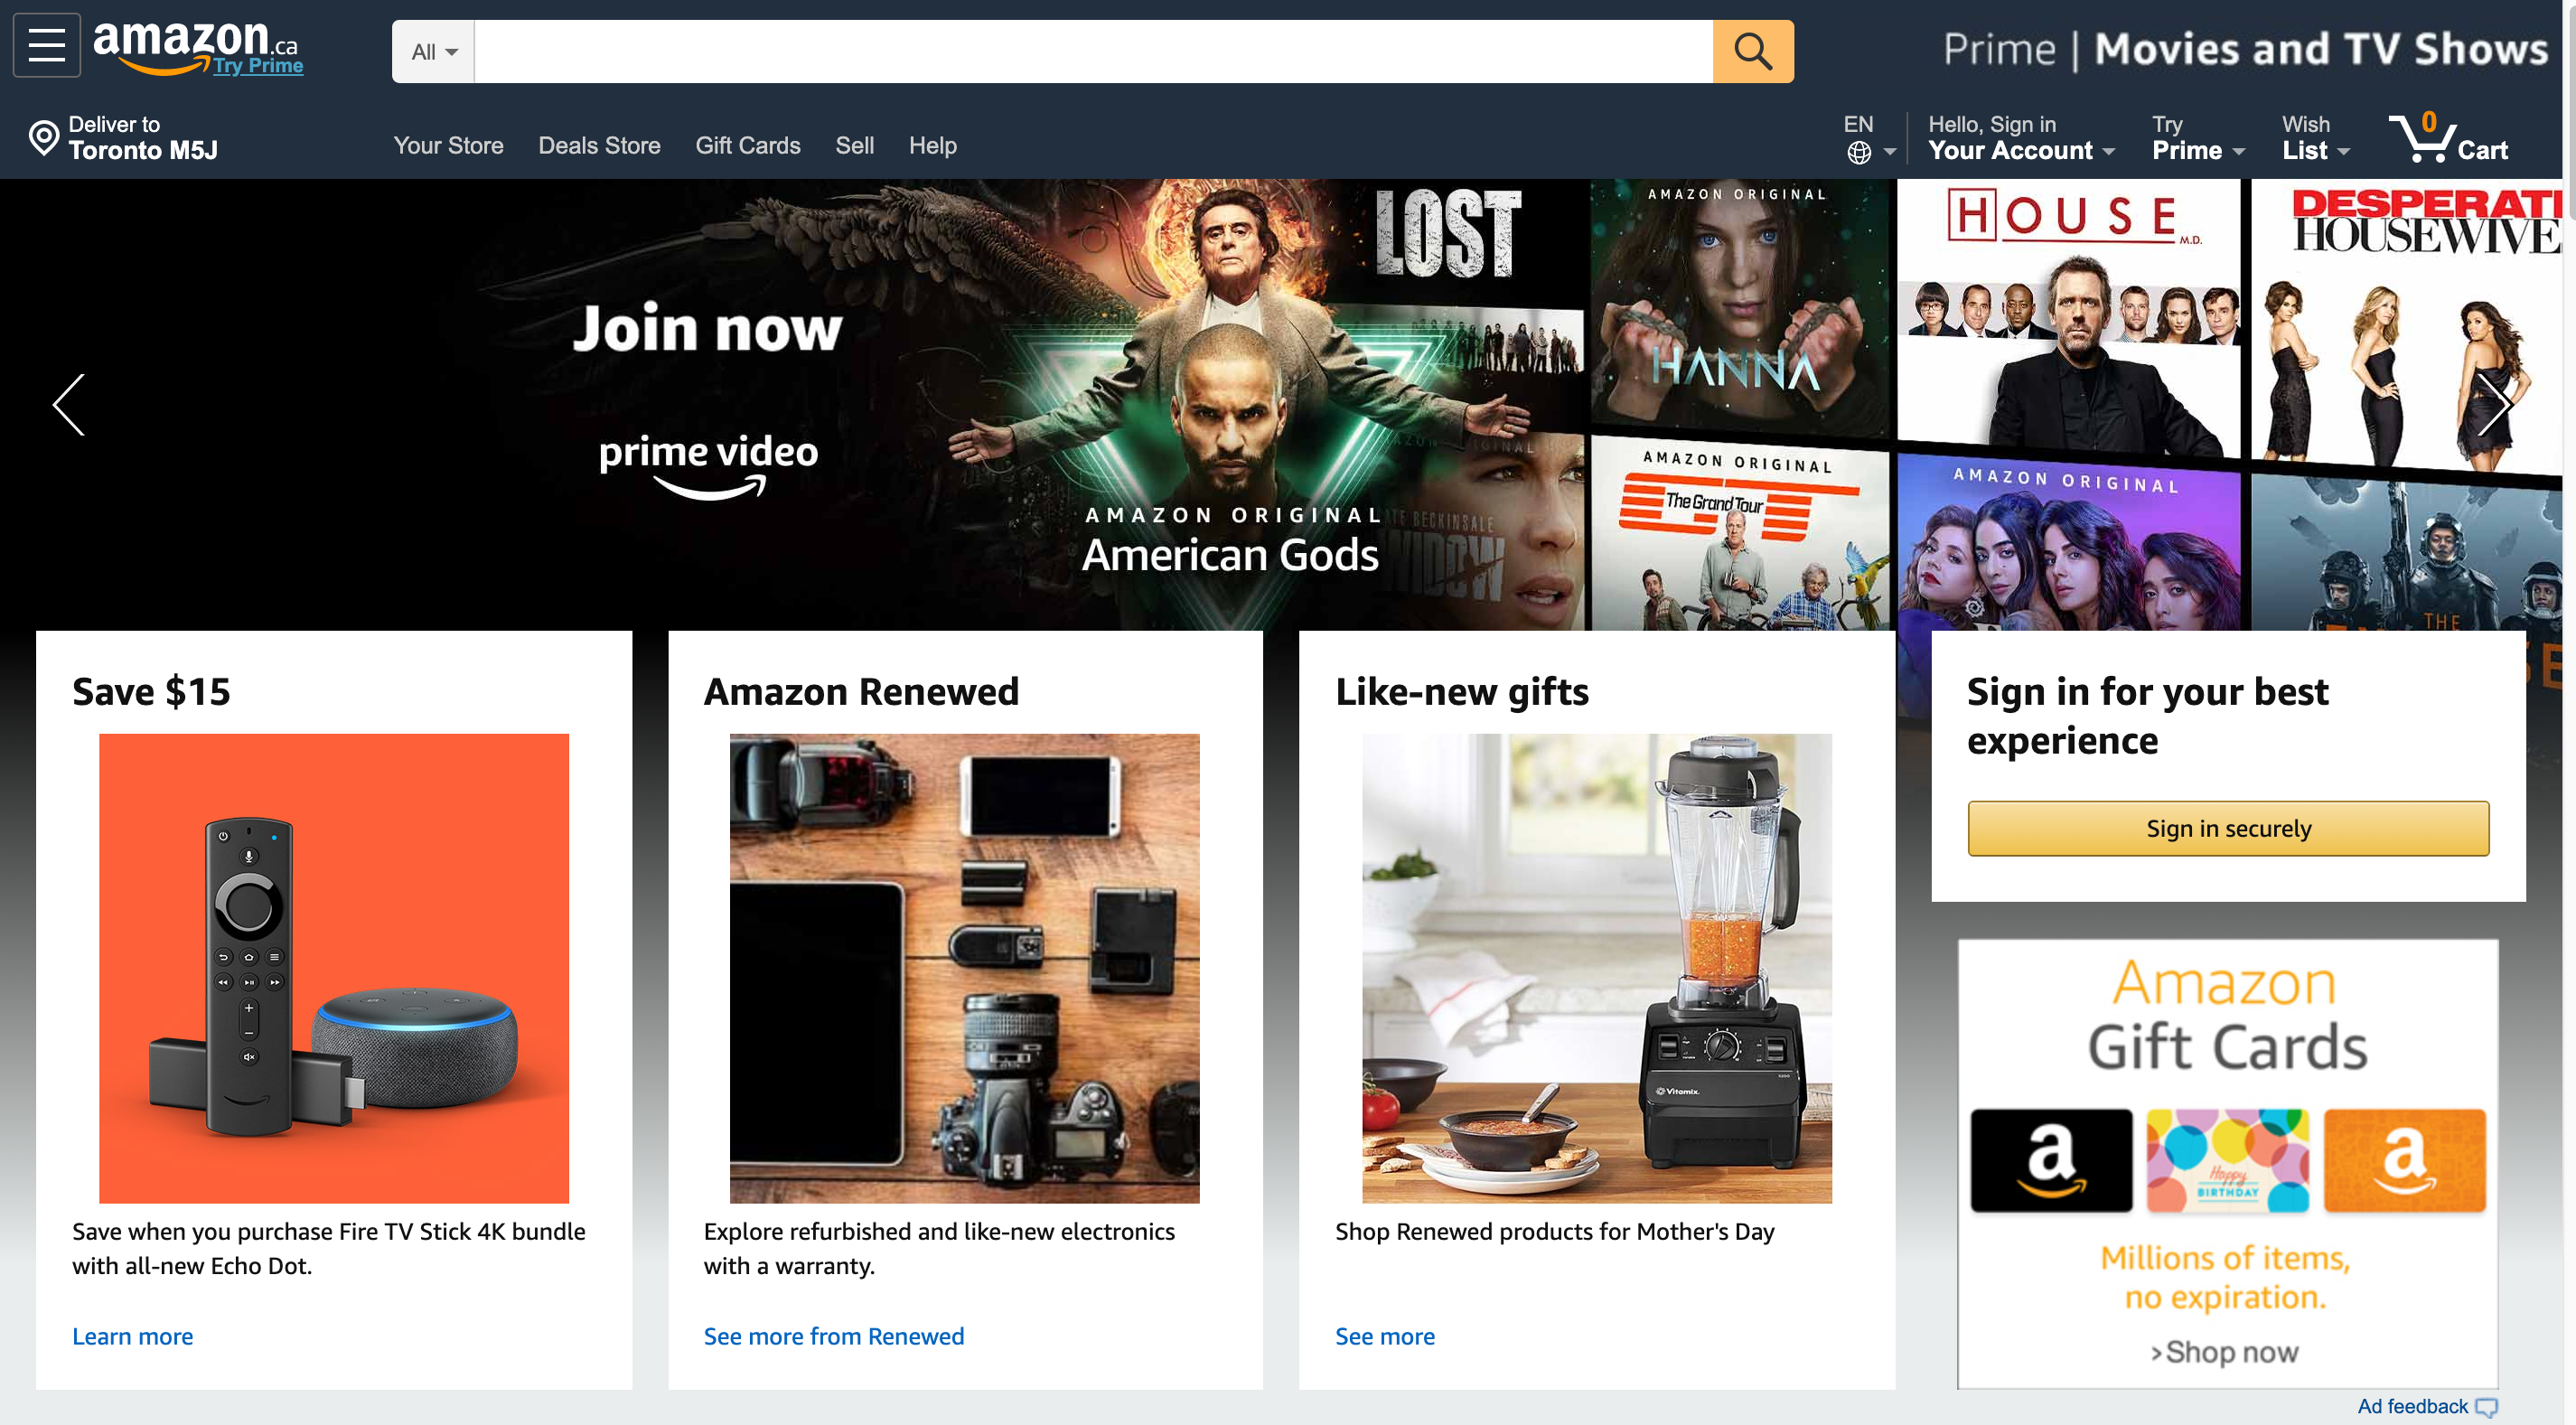 Amazon and the customer experience